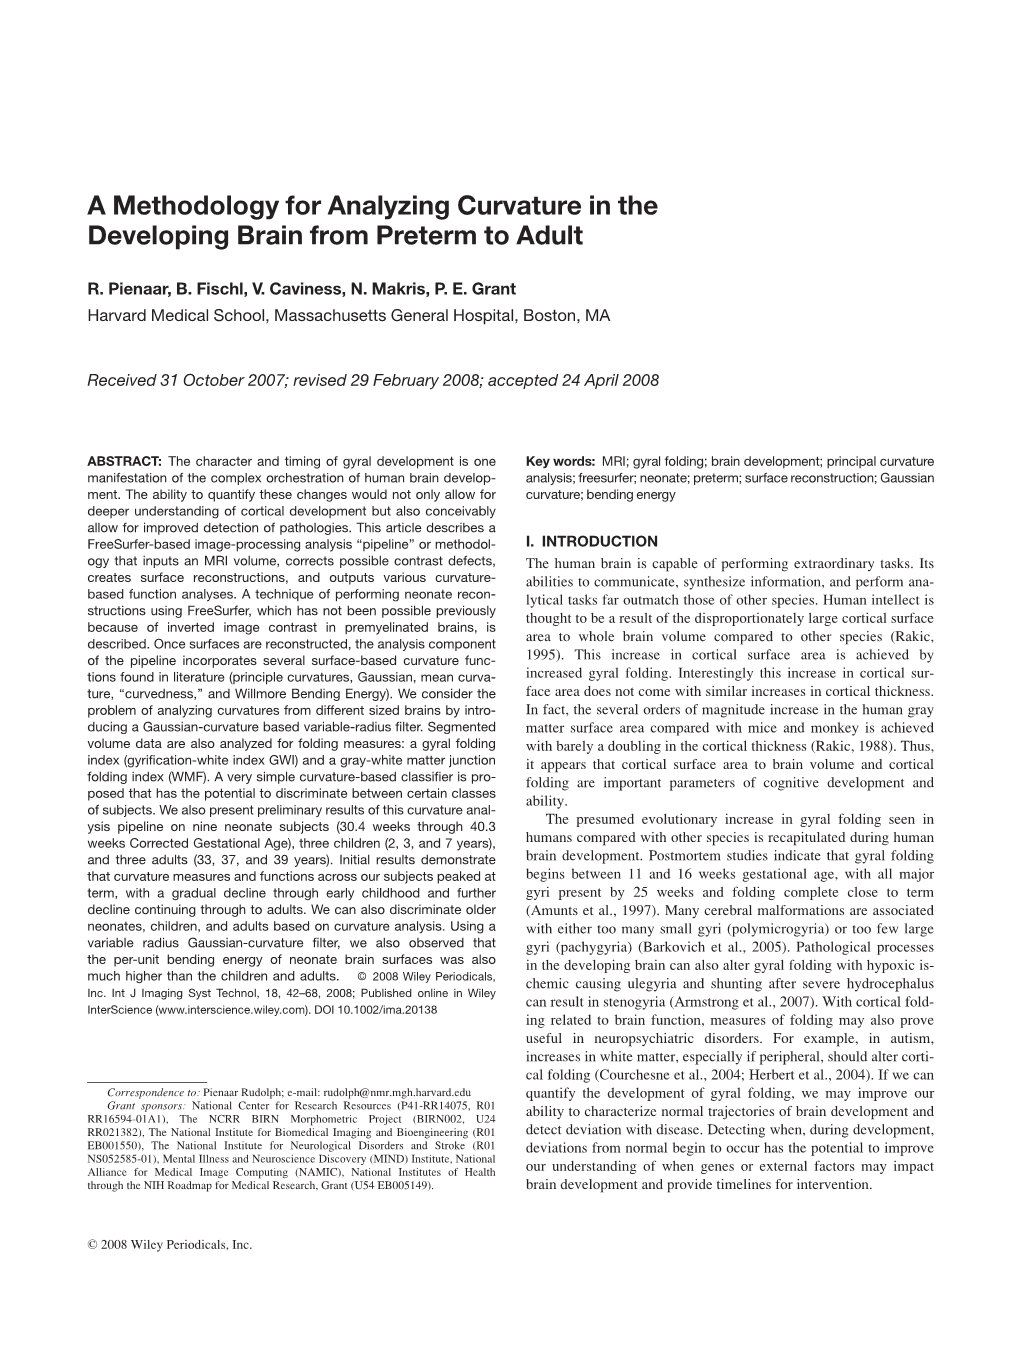 A Methodology for Analyzing Curvature in the Developing Brain from Preterm to Adult